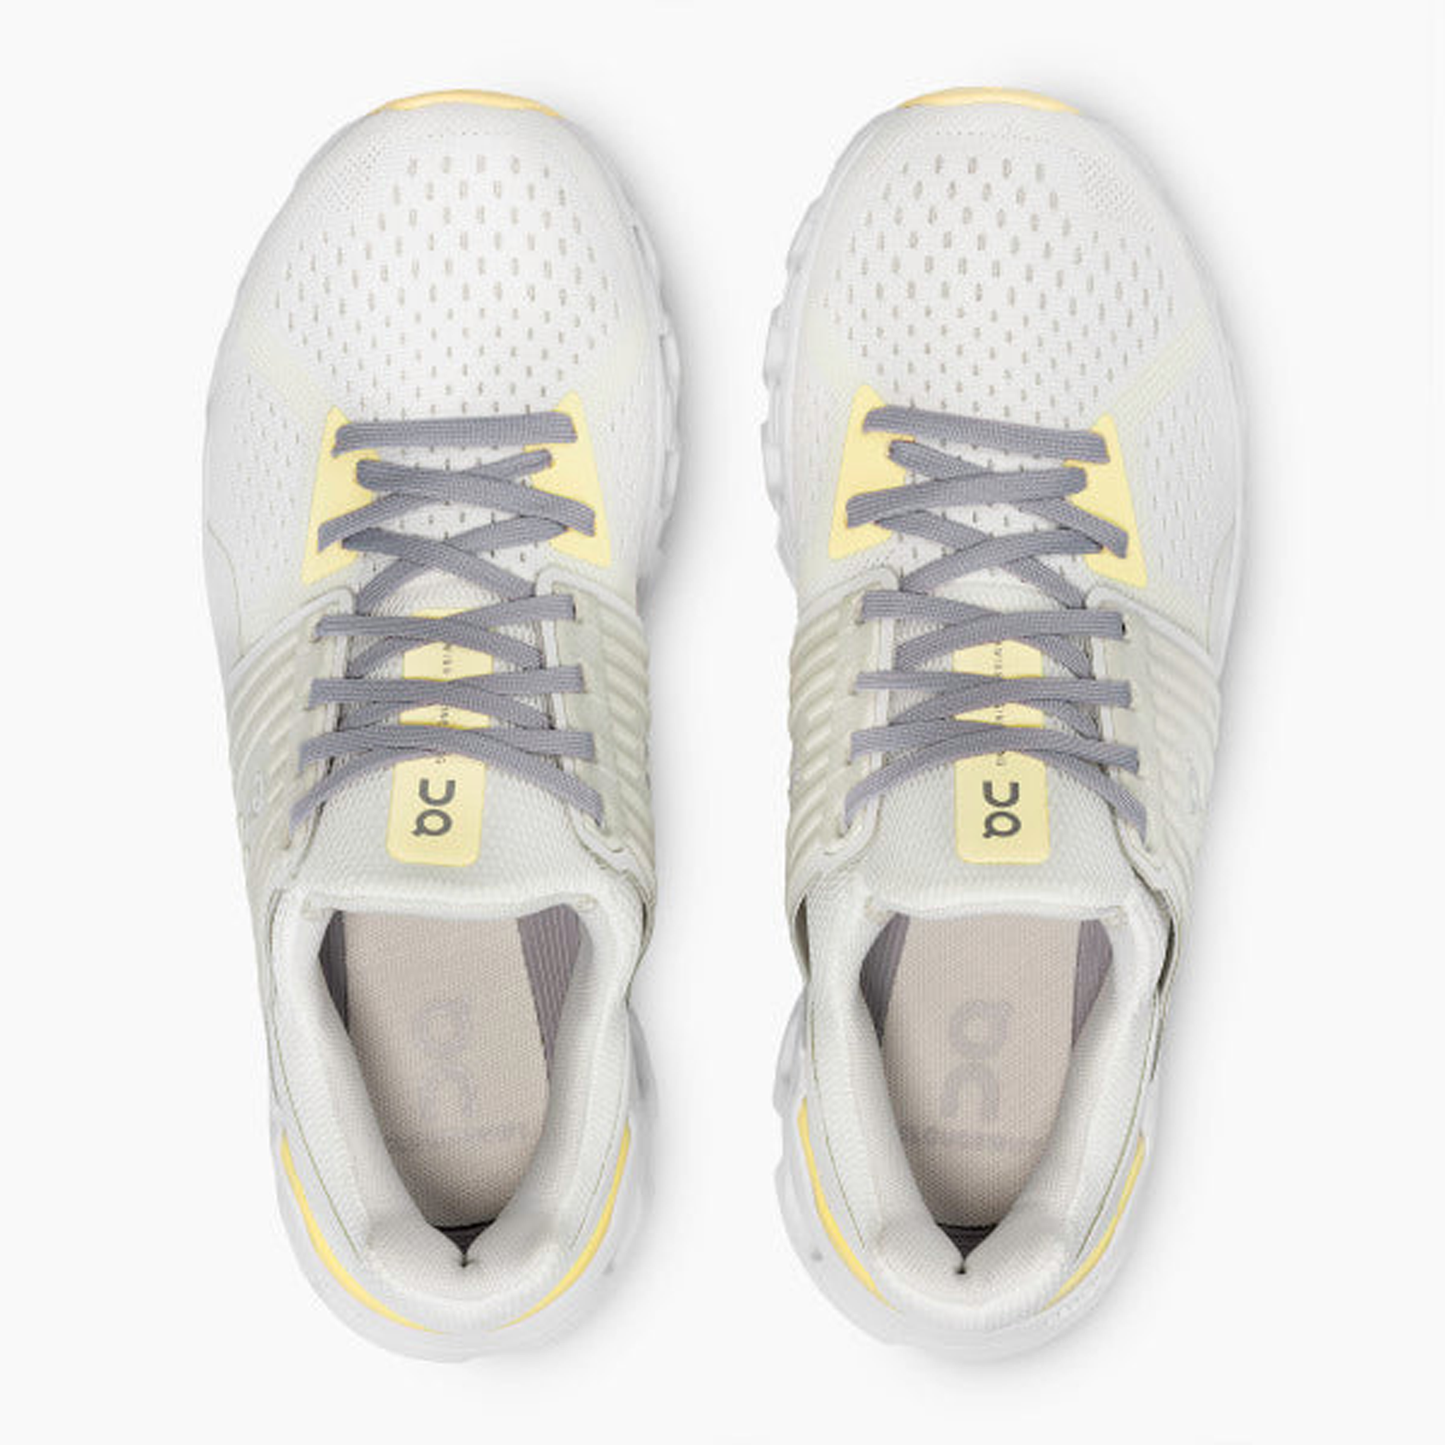 Women's ON Cloudswift running shoe in white/limelight.